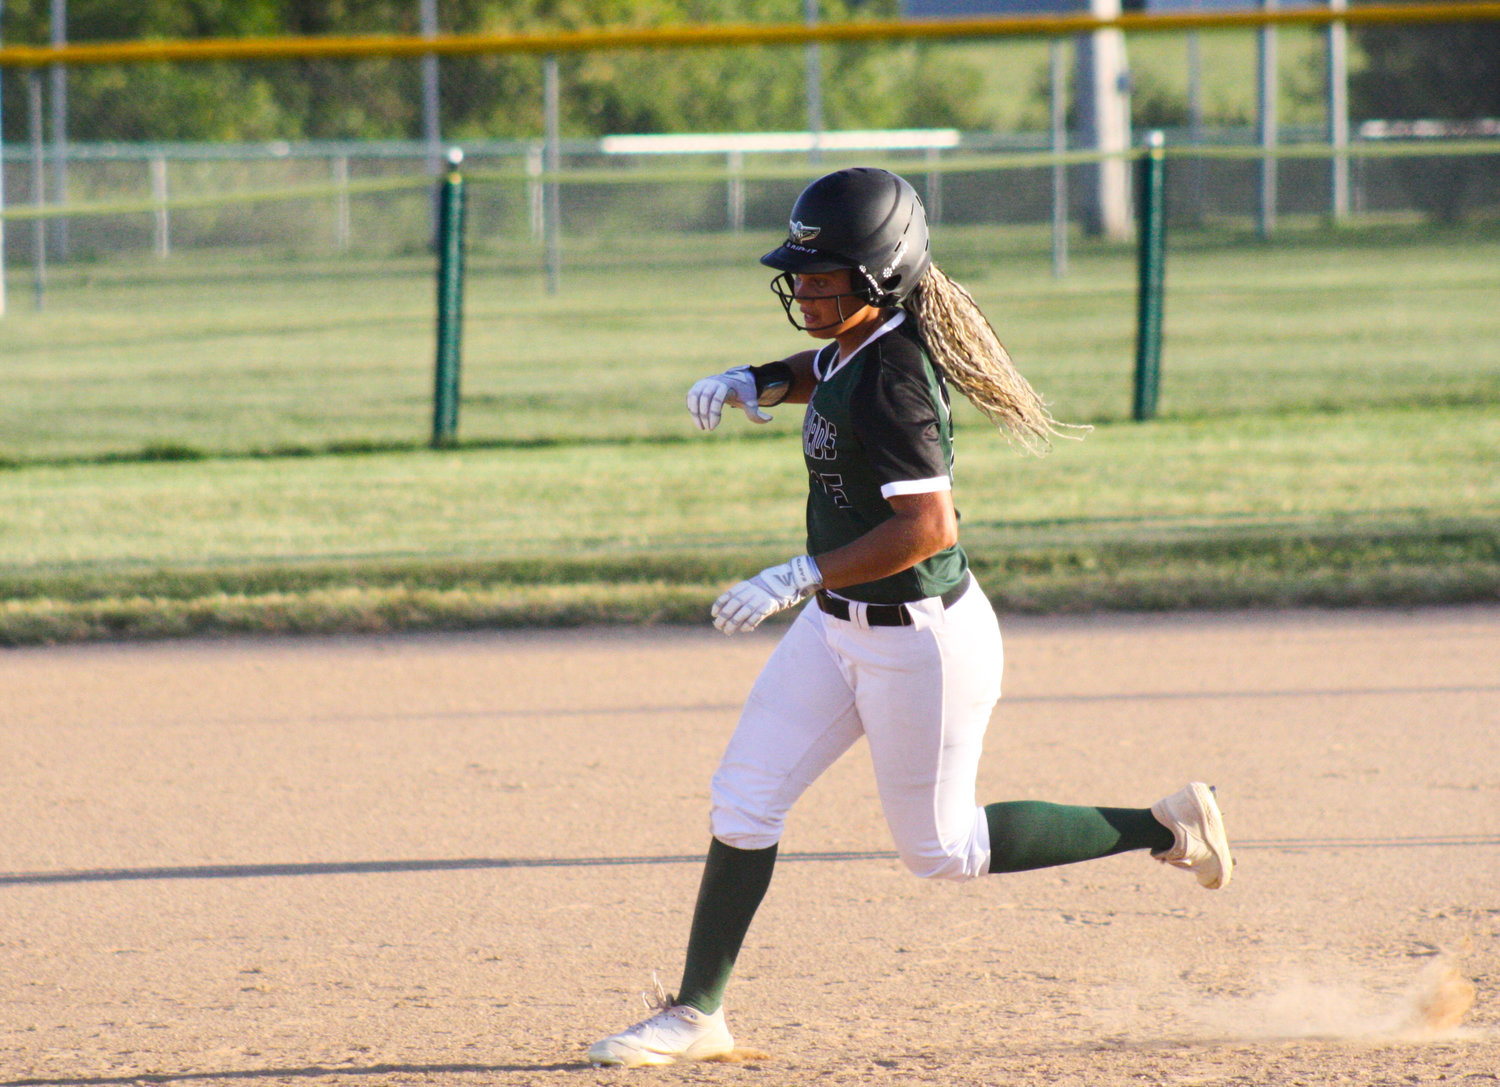 North Callaway freshman outfielder Kymorie Myers circles the bases Tuesday in the Ladybirds' 7-2 win against California on their home field in Auxvasse. Myers drove in three runs, including two on her first career triple, from the No. 3 spot in the order.